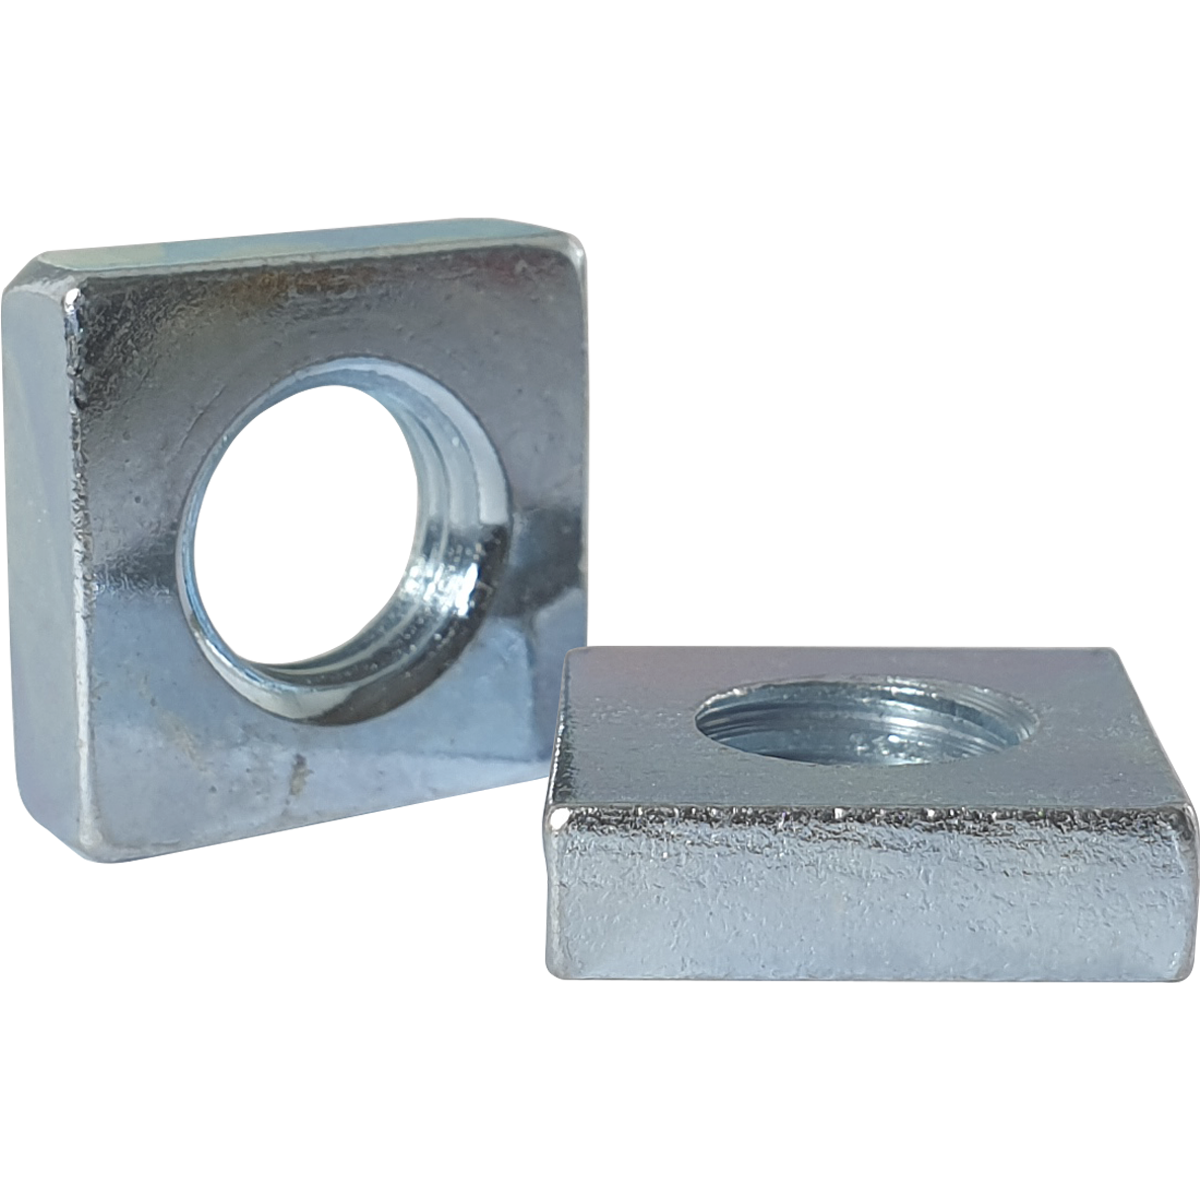 BZP, metric, square nuts, also known as square head nuts. Mid-level corrosion resistance with various sizes available at great prices. Bulk discounts available. 